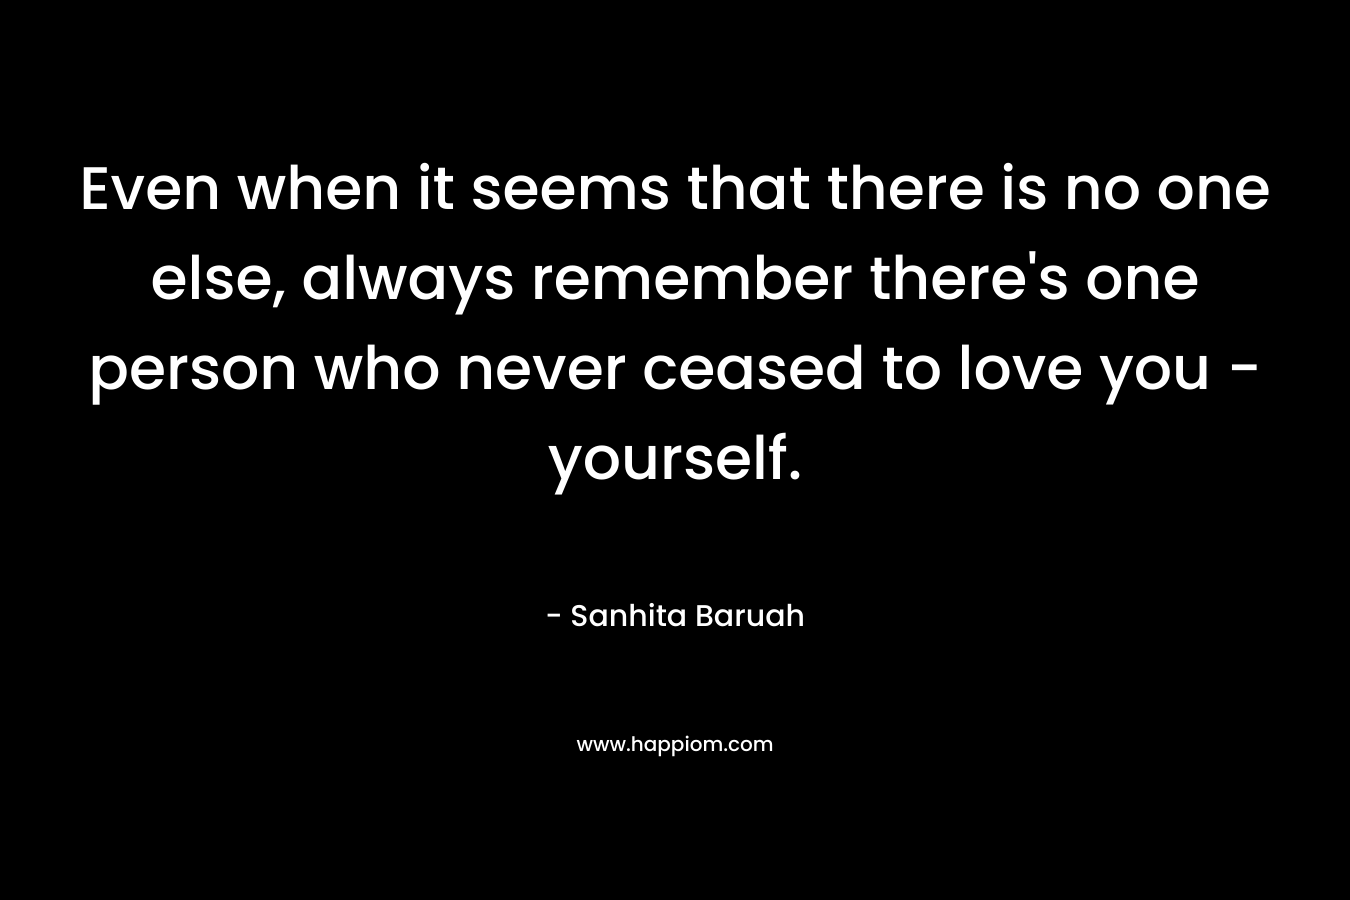 Even when it seems that there is no one else, always remember there's one person who never ceased to love you - yourself.